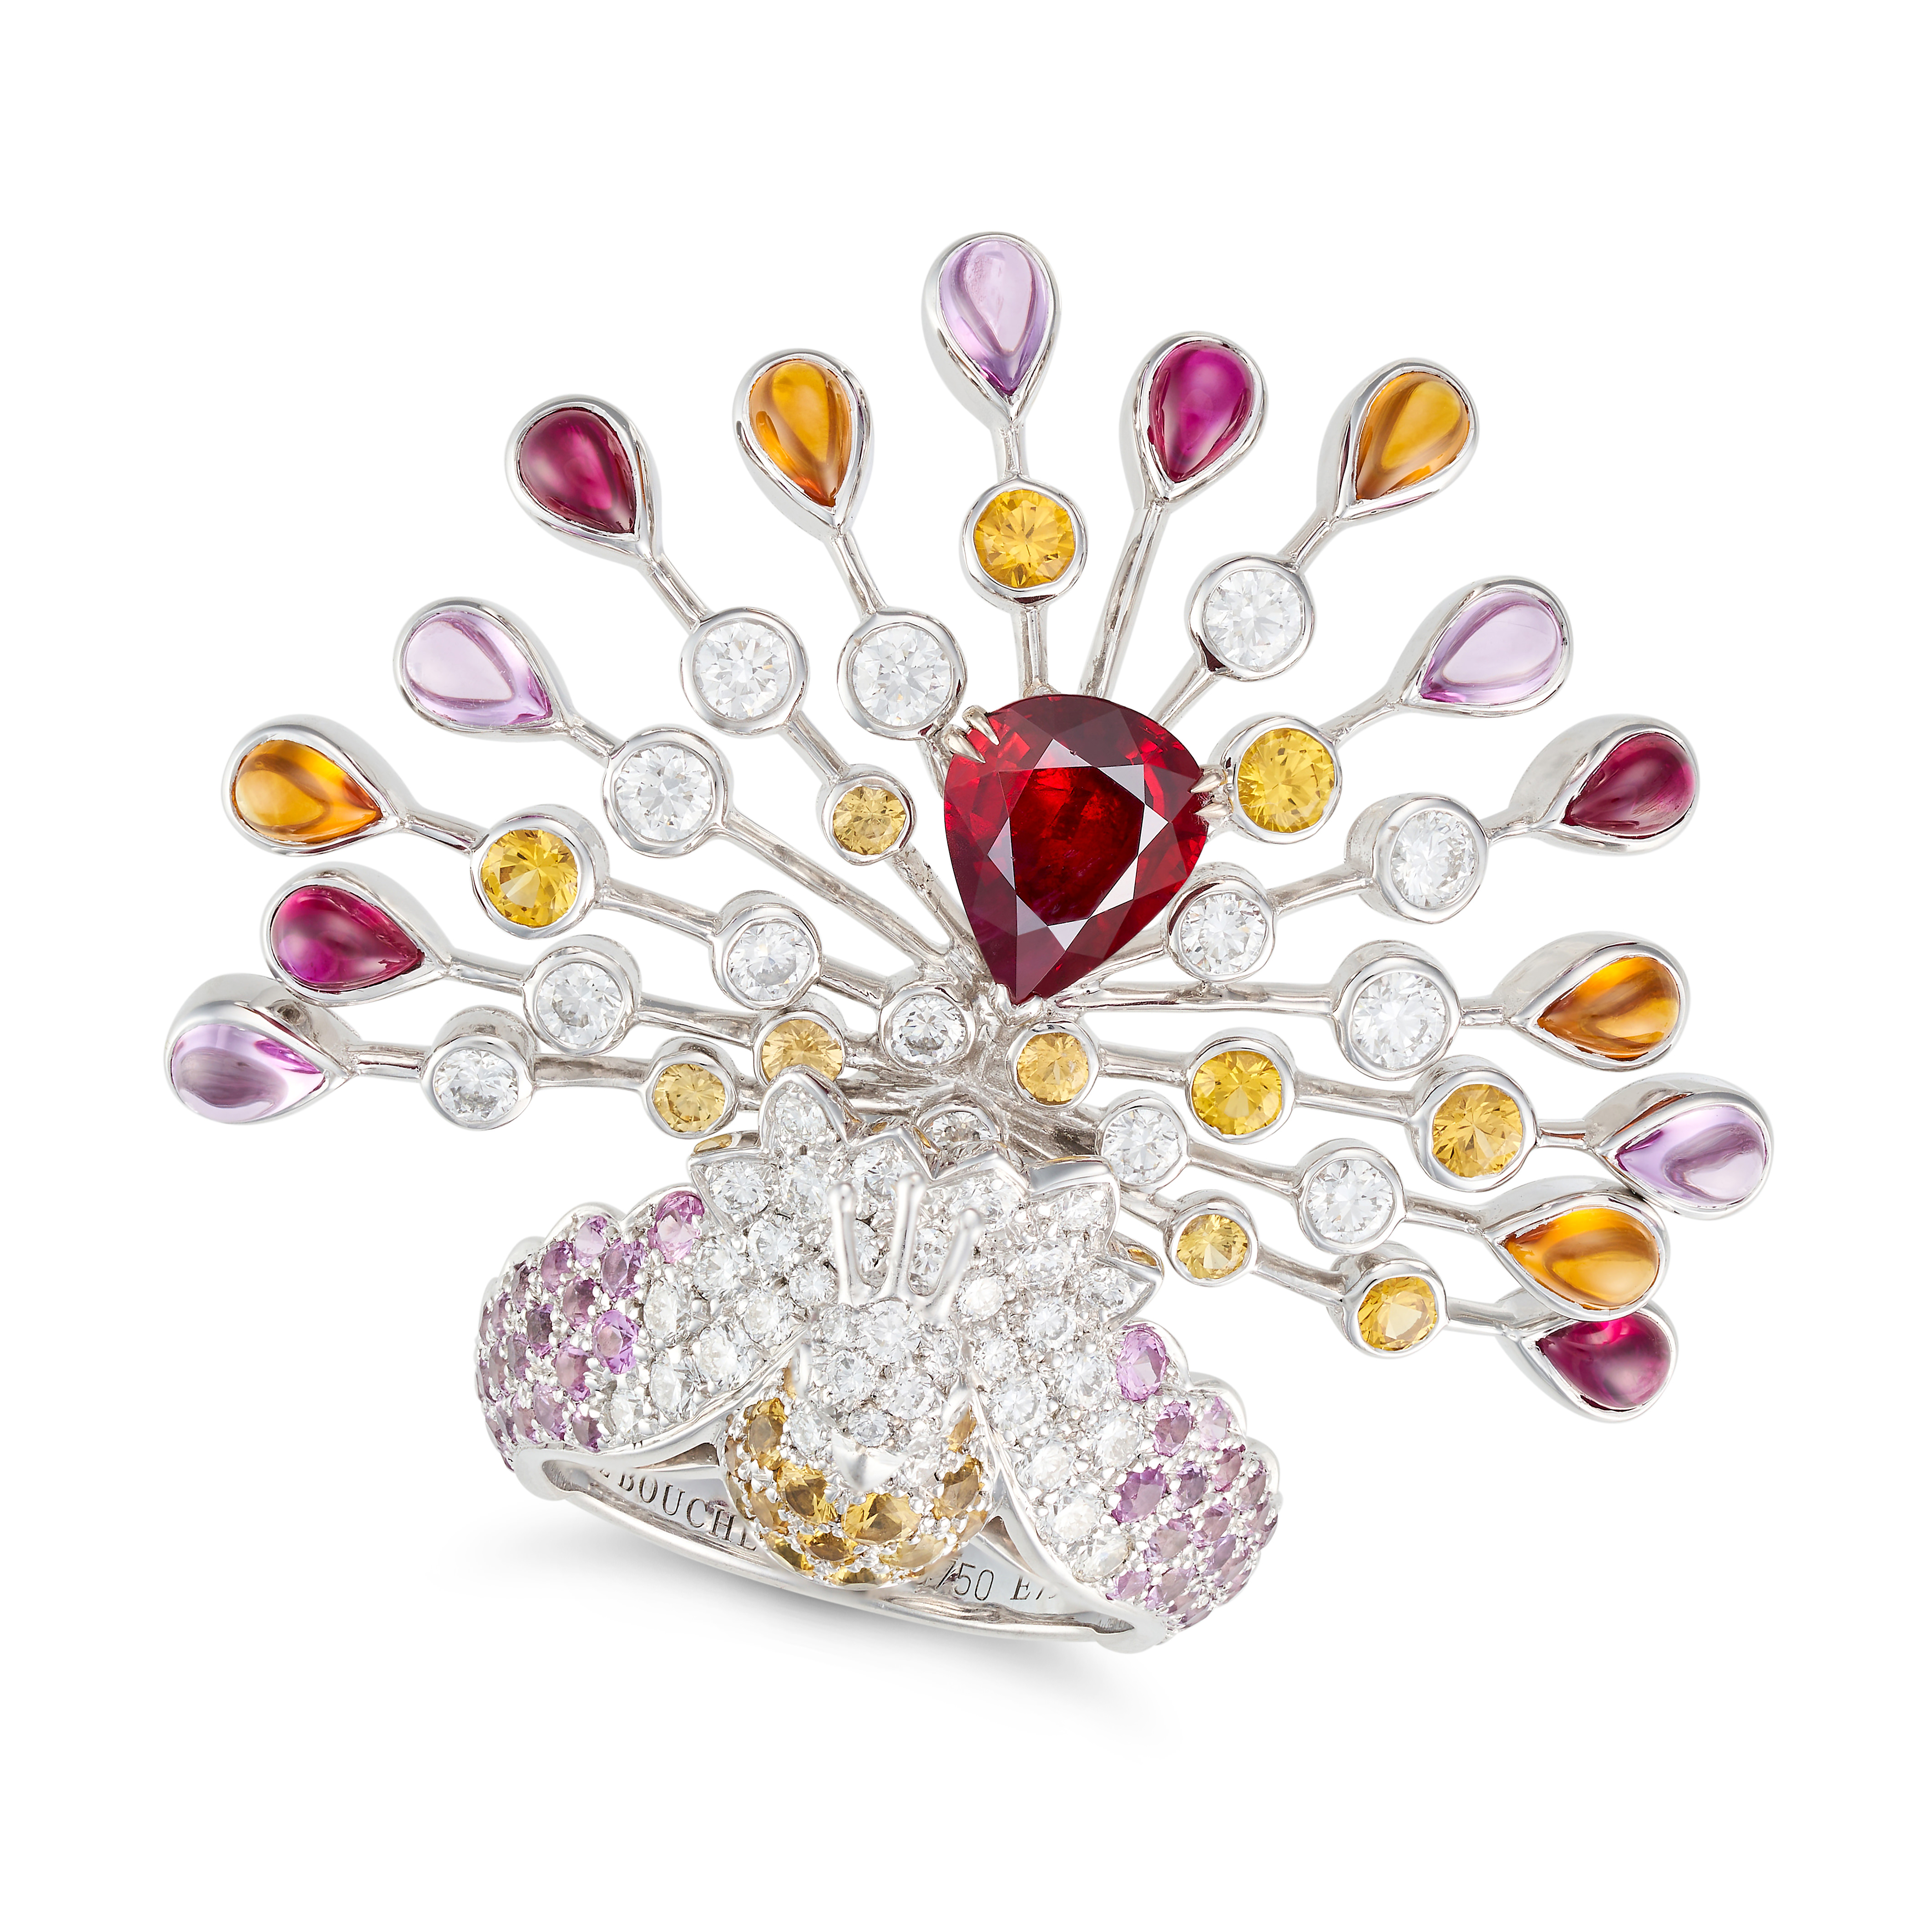 BOUCHERON, A MULTIGEM PEACOCK RING designed as a peacock set with round brilliant cut diamonds an... - Image 2 of 4